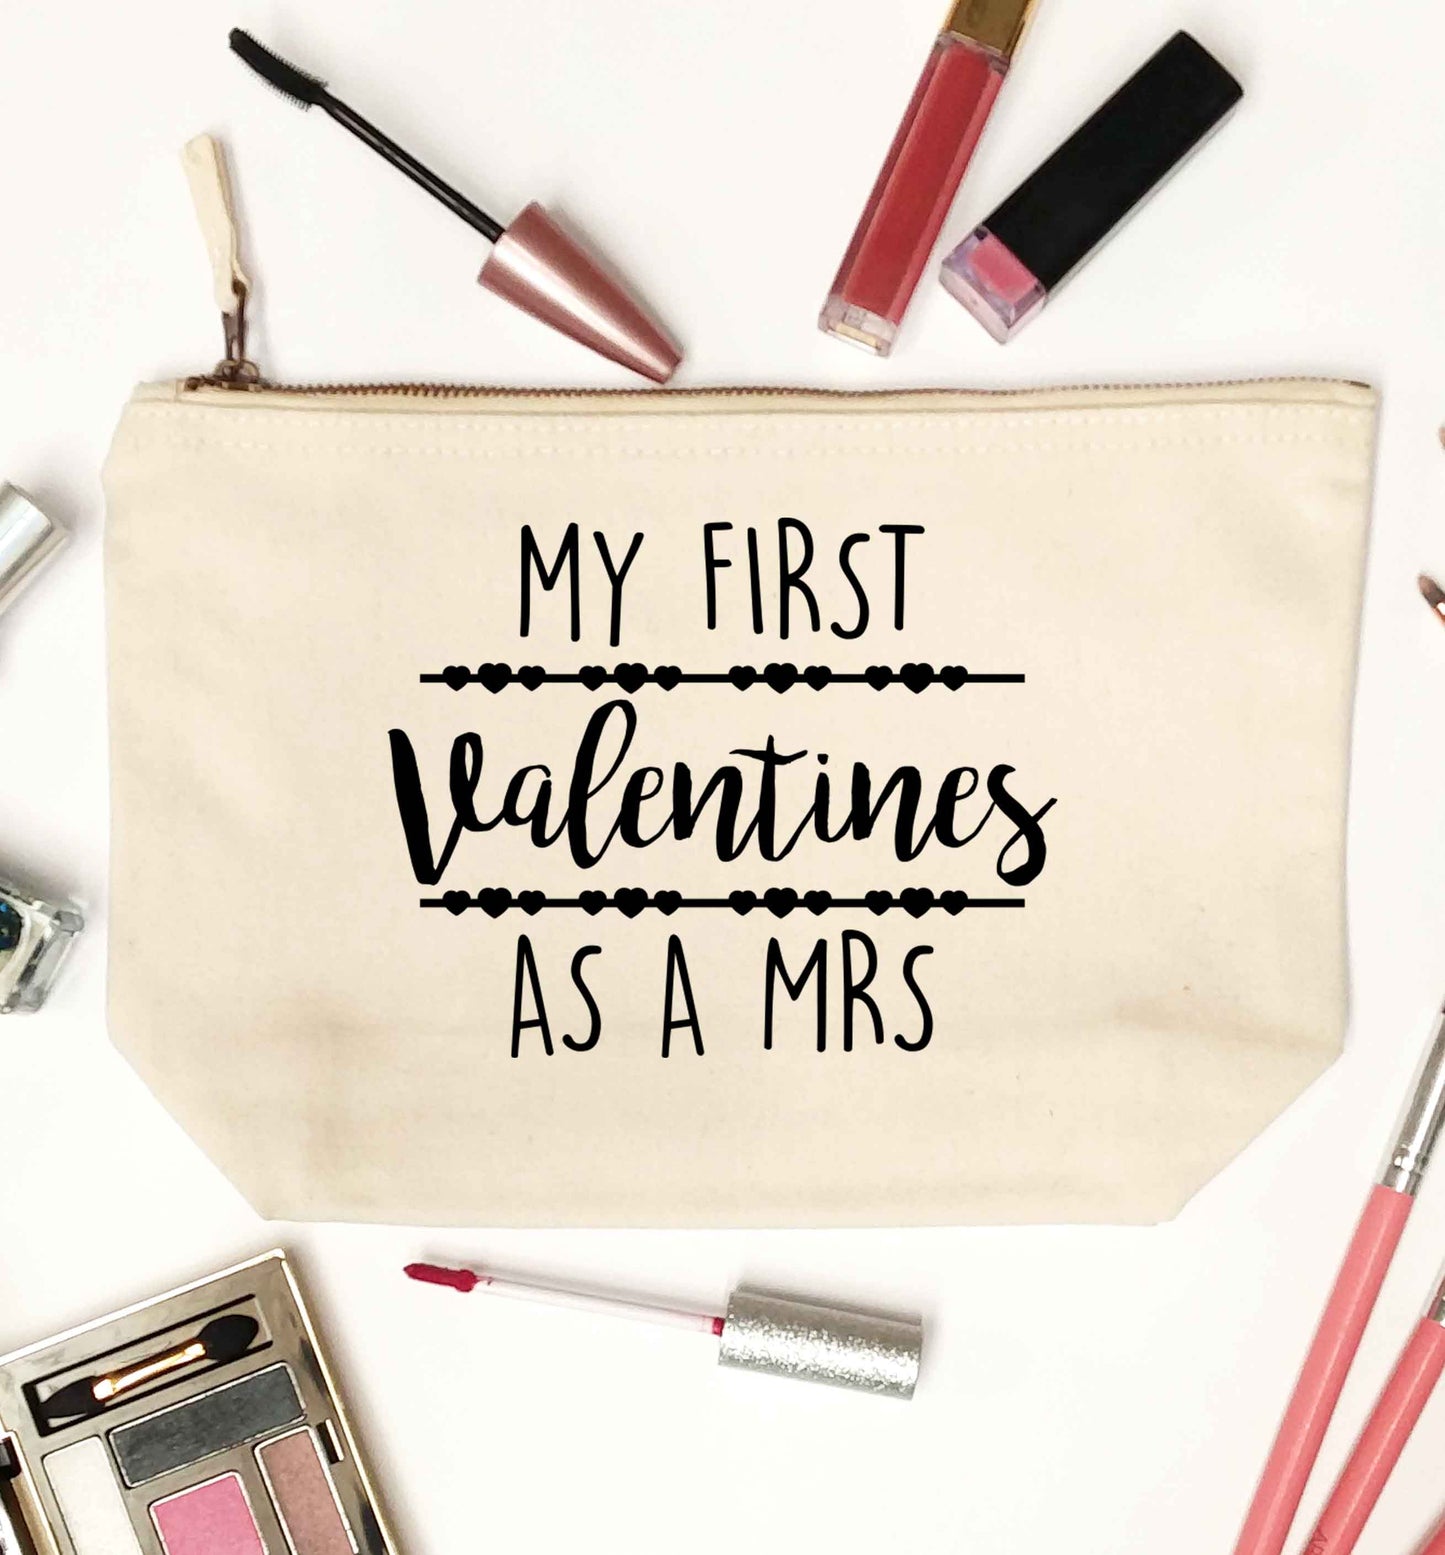 My first valentines as a Mrs natural makeup bag